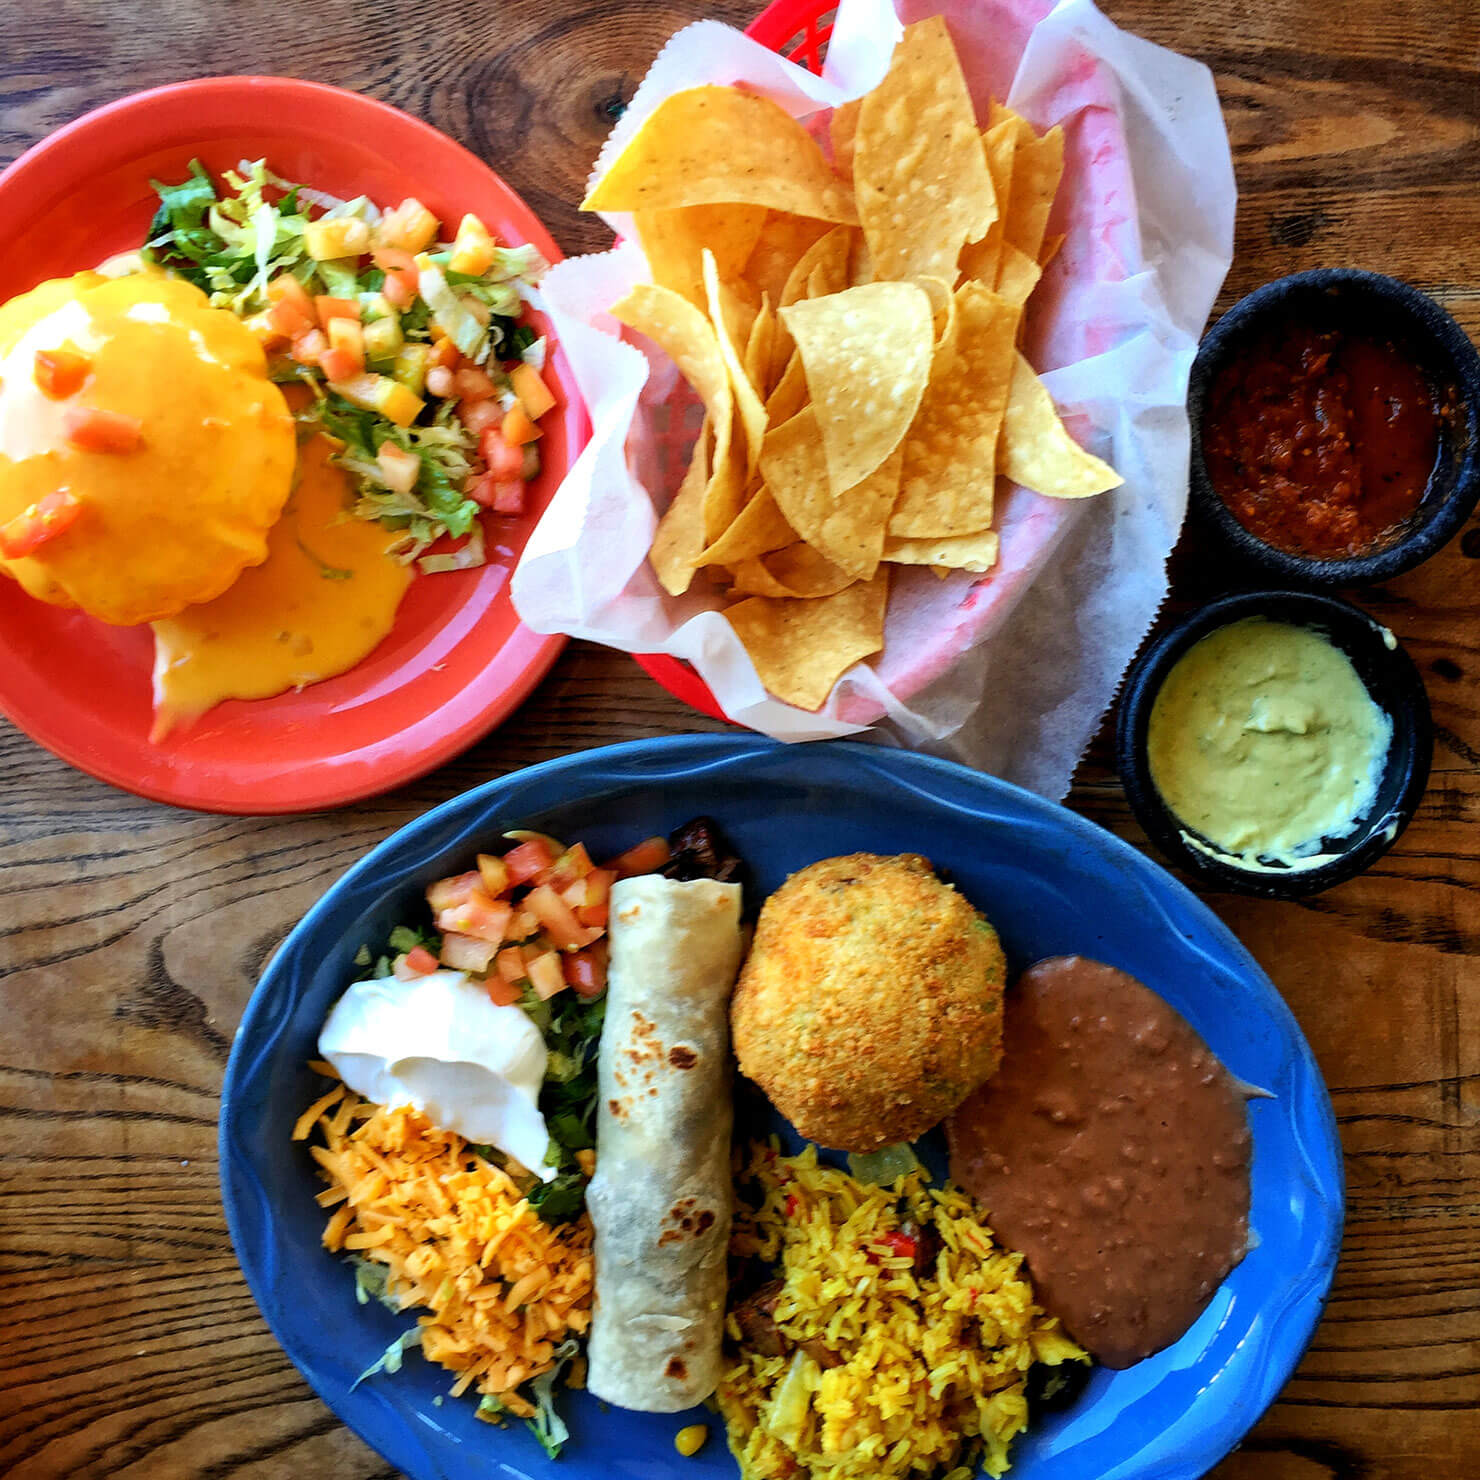 Ten great meals from recent trips to Texas | Homesick Texan